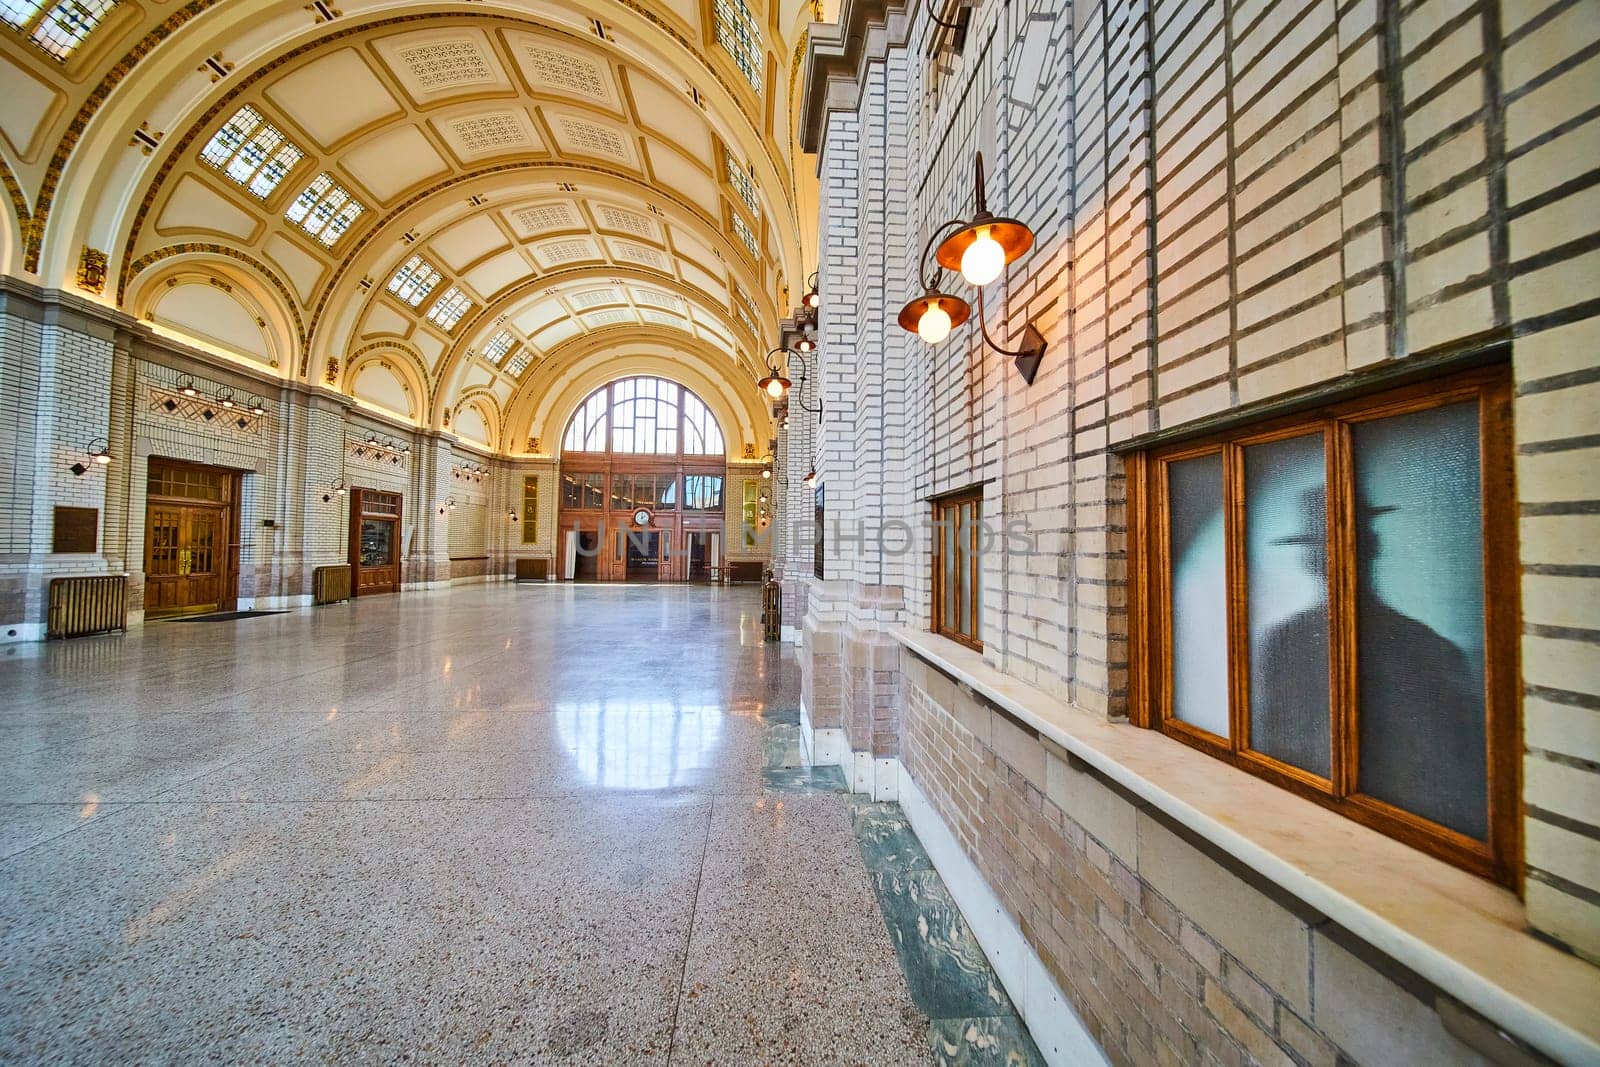 Elegant early 20th-century interior of Baker Street Station in Fort Wayne, Indiana, showcasing grand archways and a regal design.